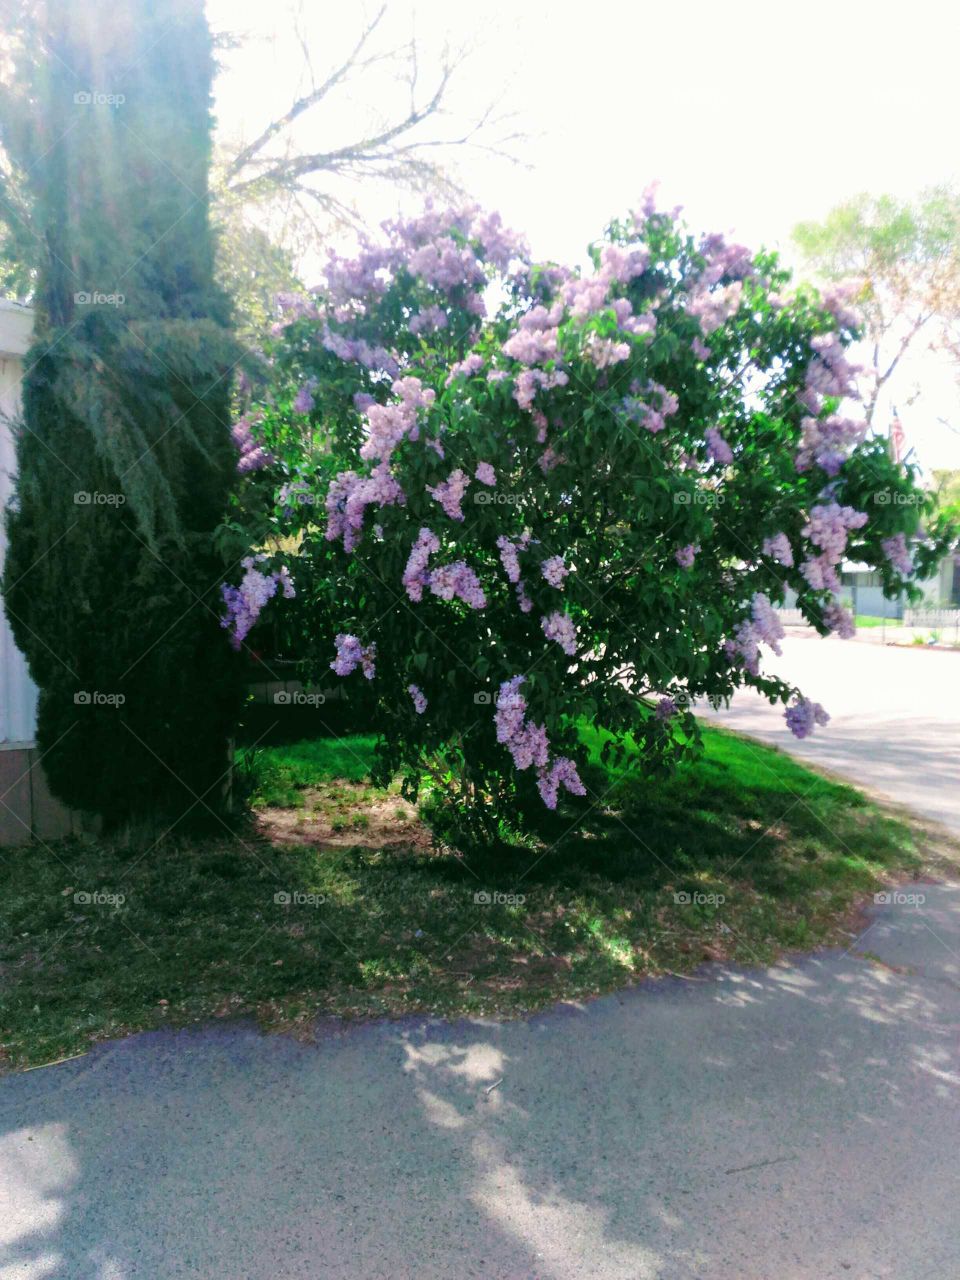 Beautiful Spring Lilacs! They Smell amazing!